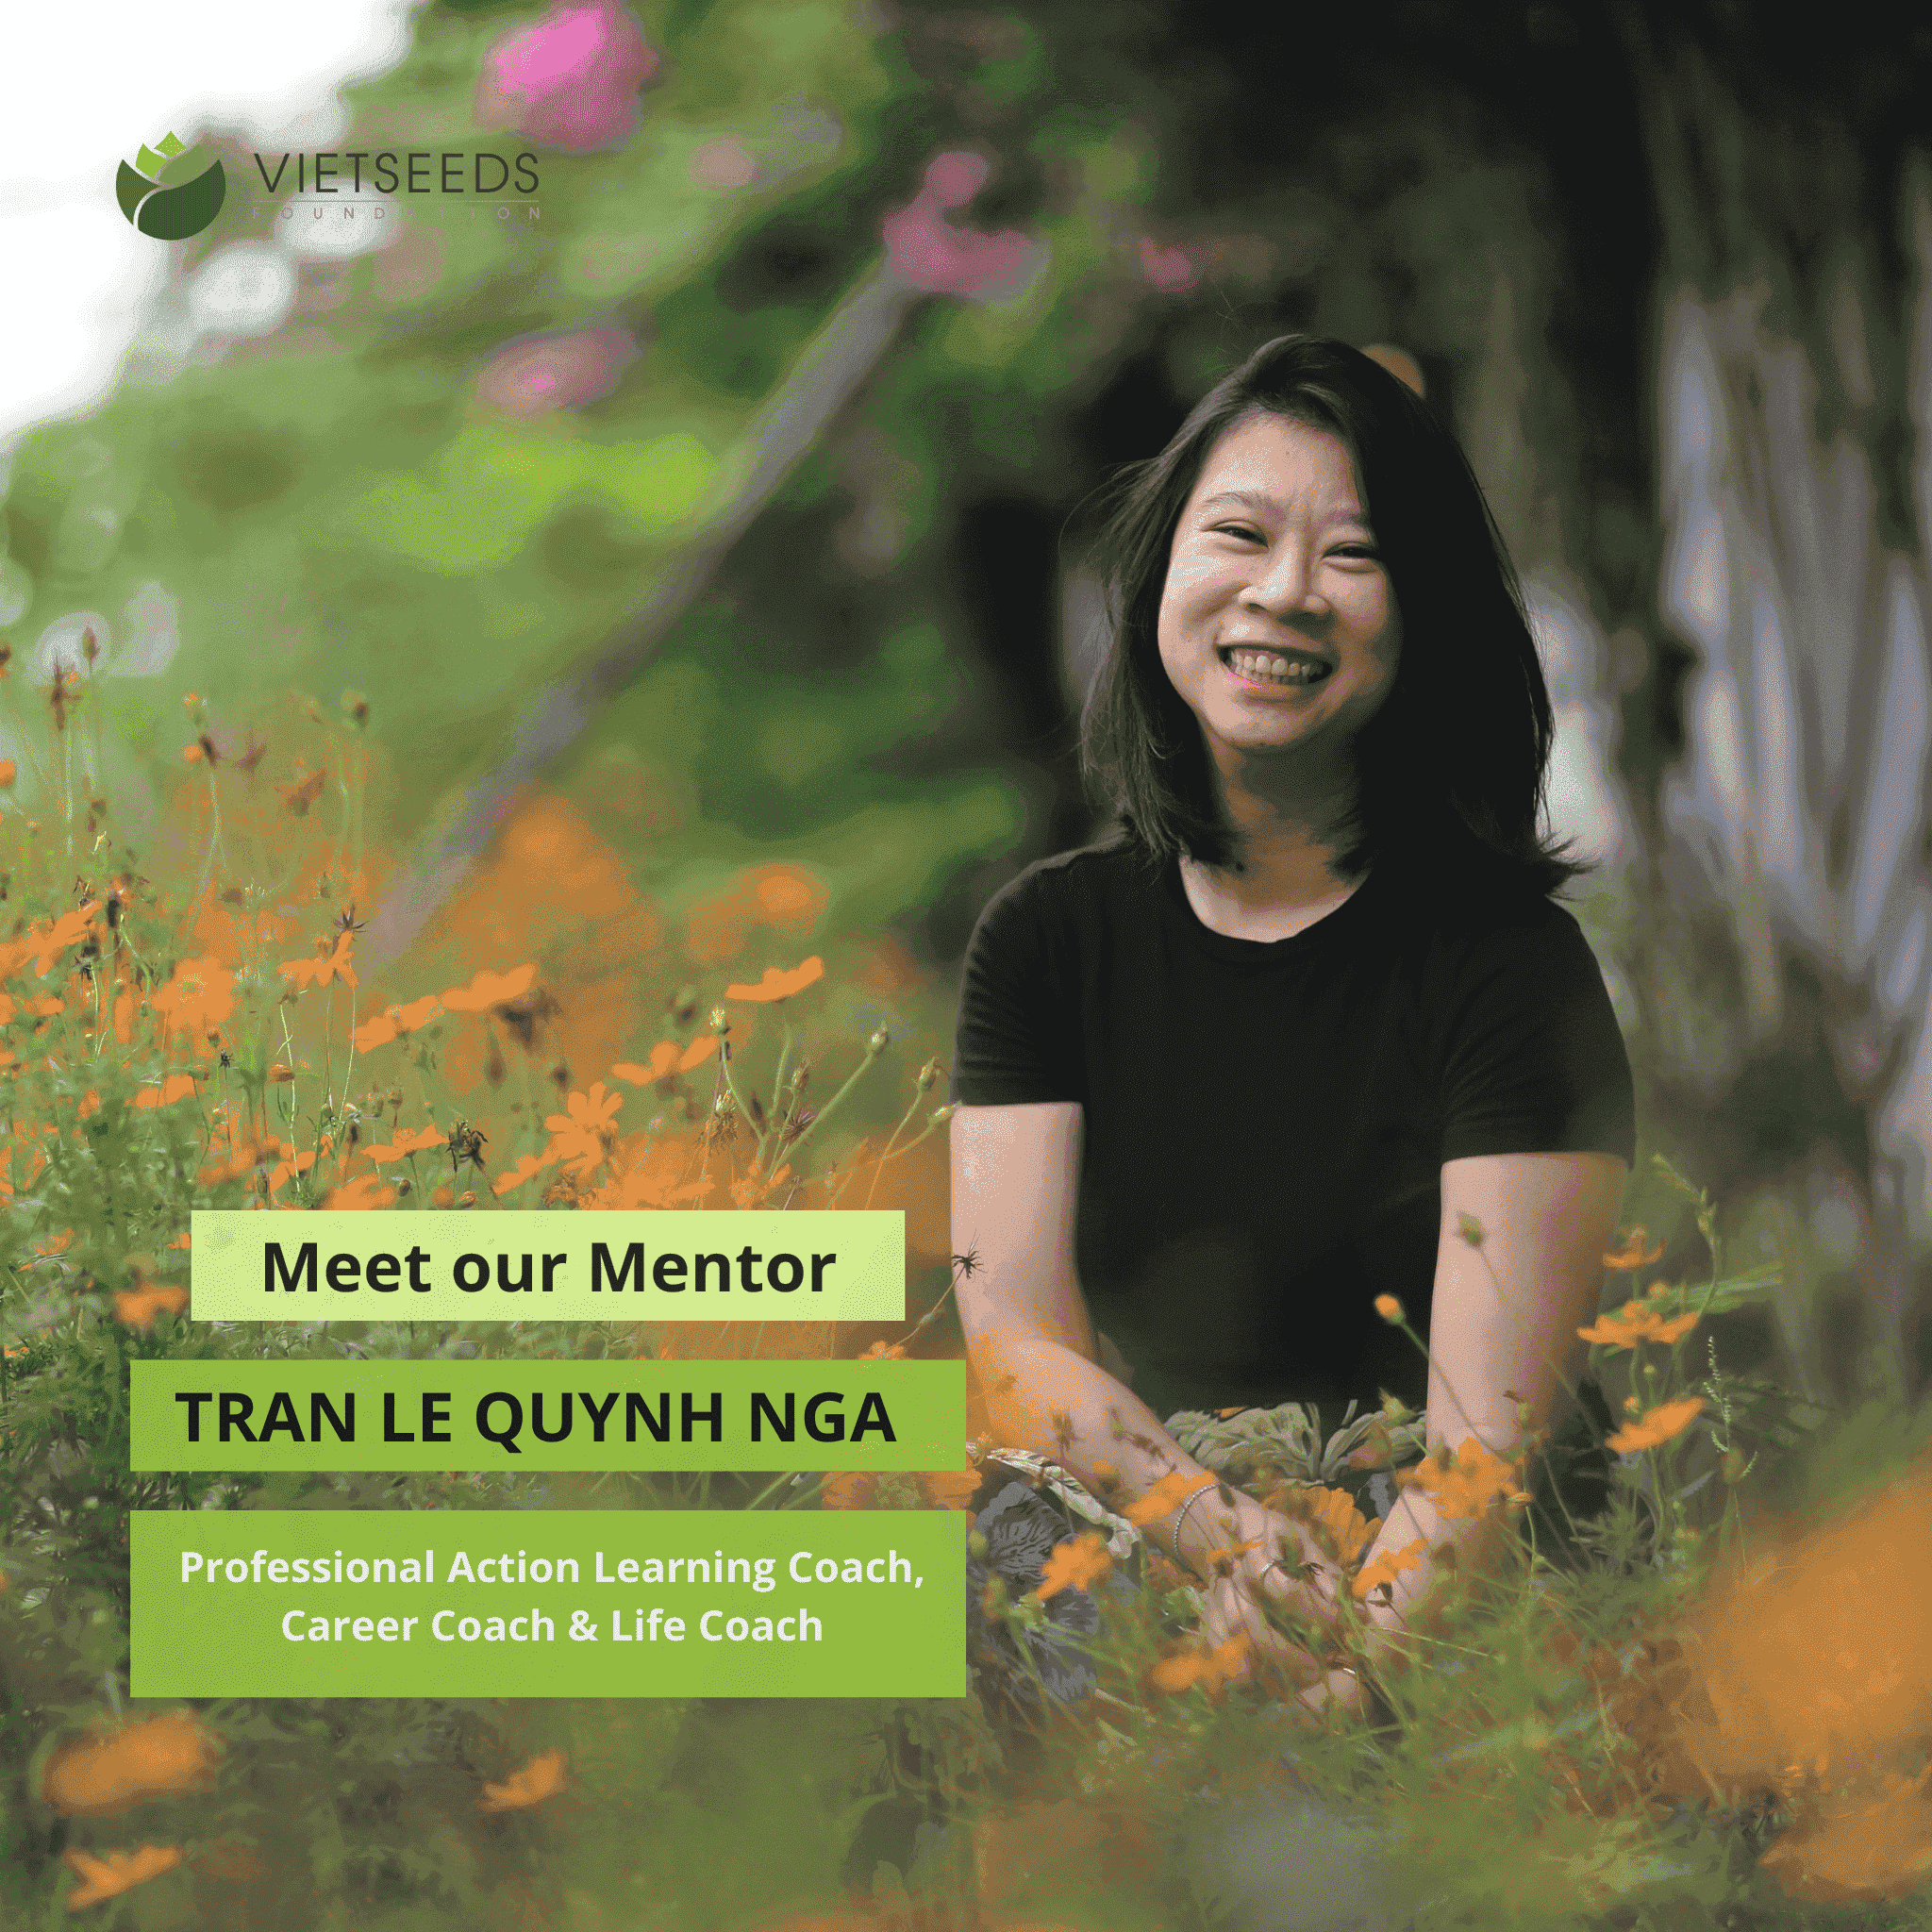 MEETING WITH MENTOR TRAN LE QUYNH NGA - ONE OF THE MENTORS WITH THE MOST MENTEES IN VIETSEEDS